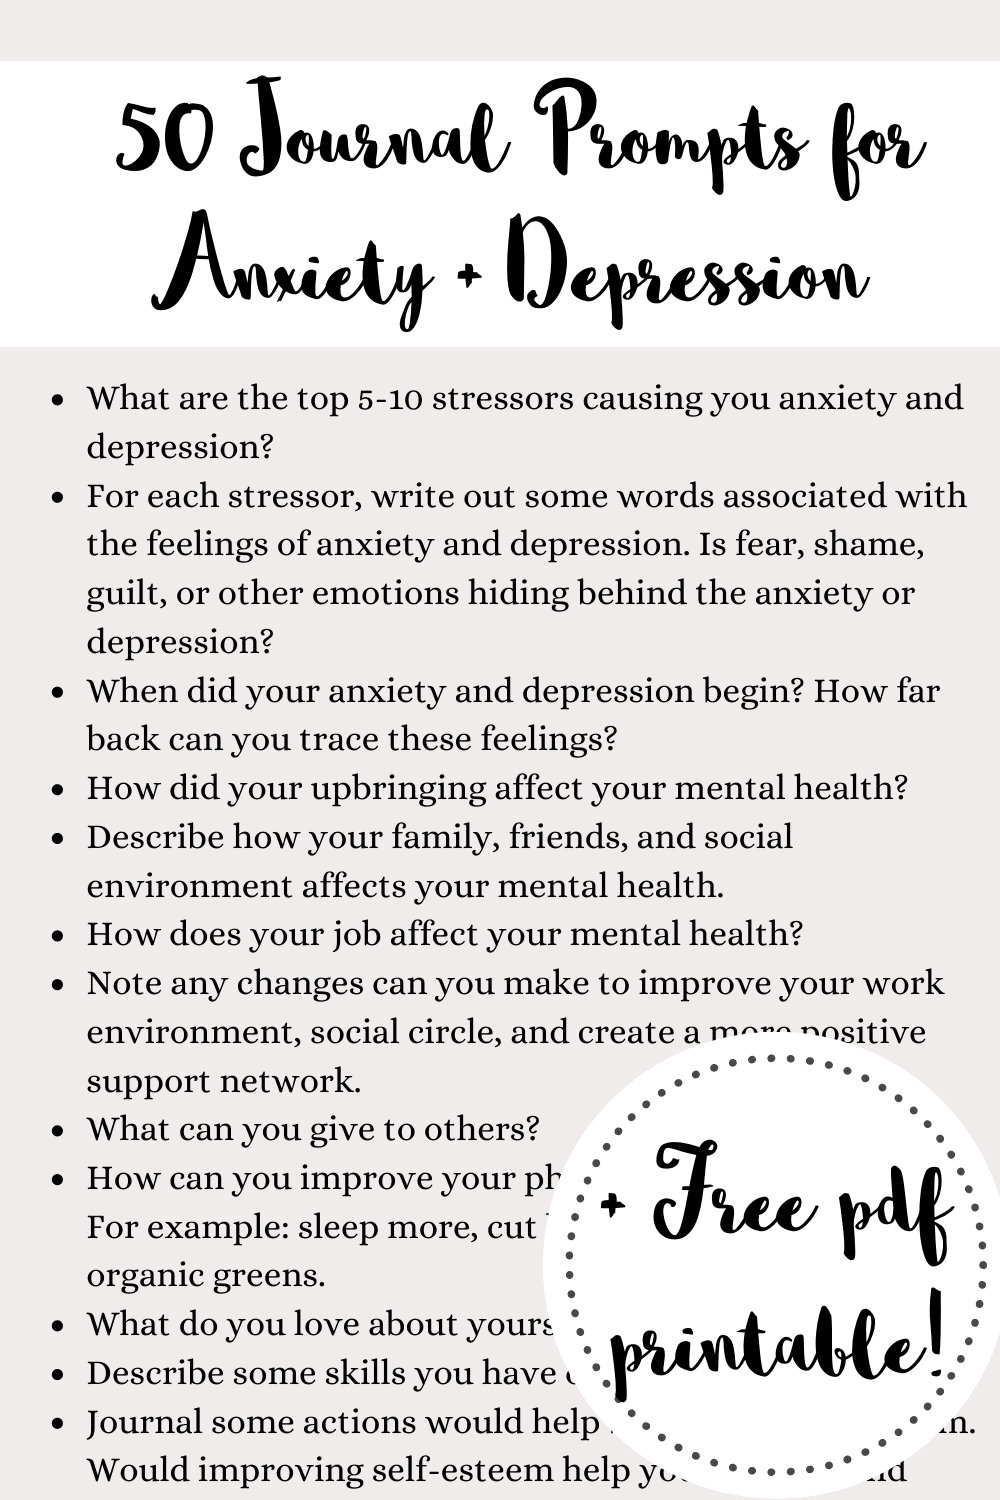 50 Journal Prompts for Anxiety and Depression {+ Free PDF Printable ...